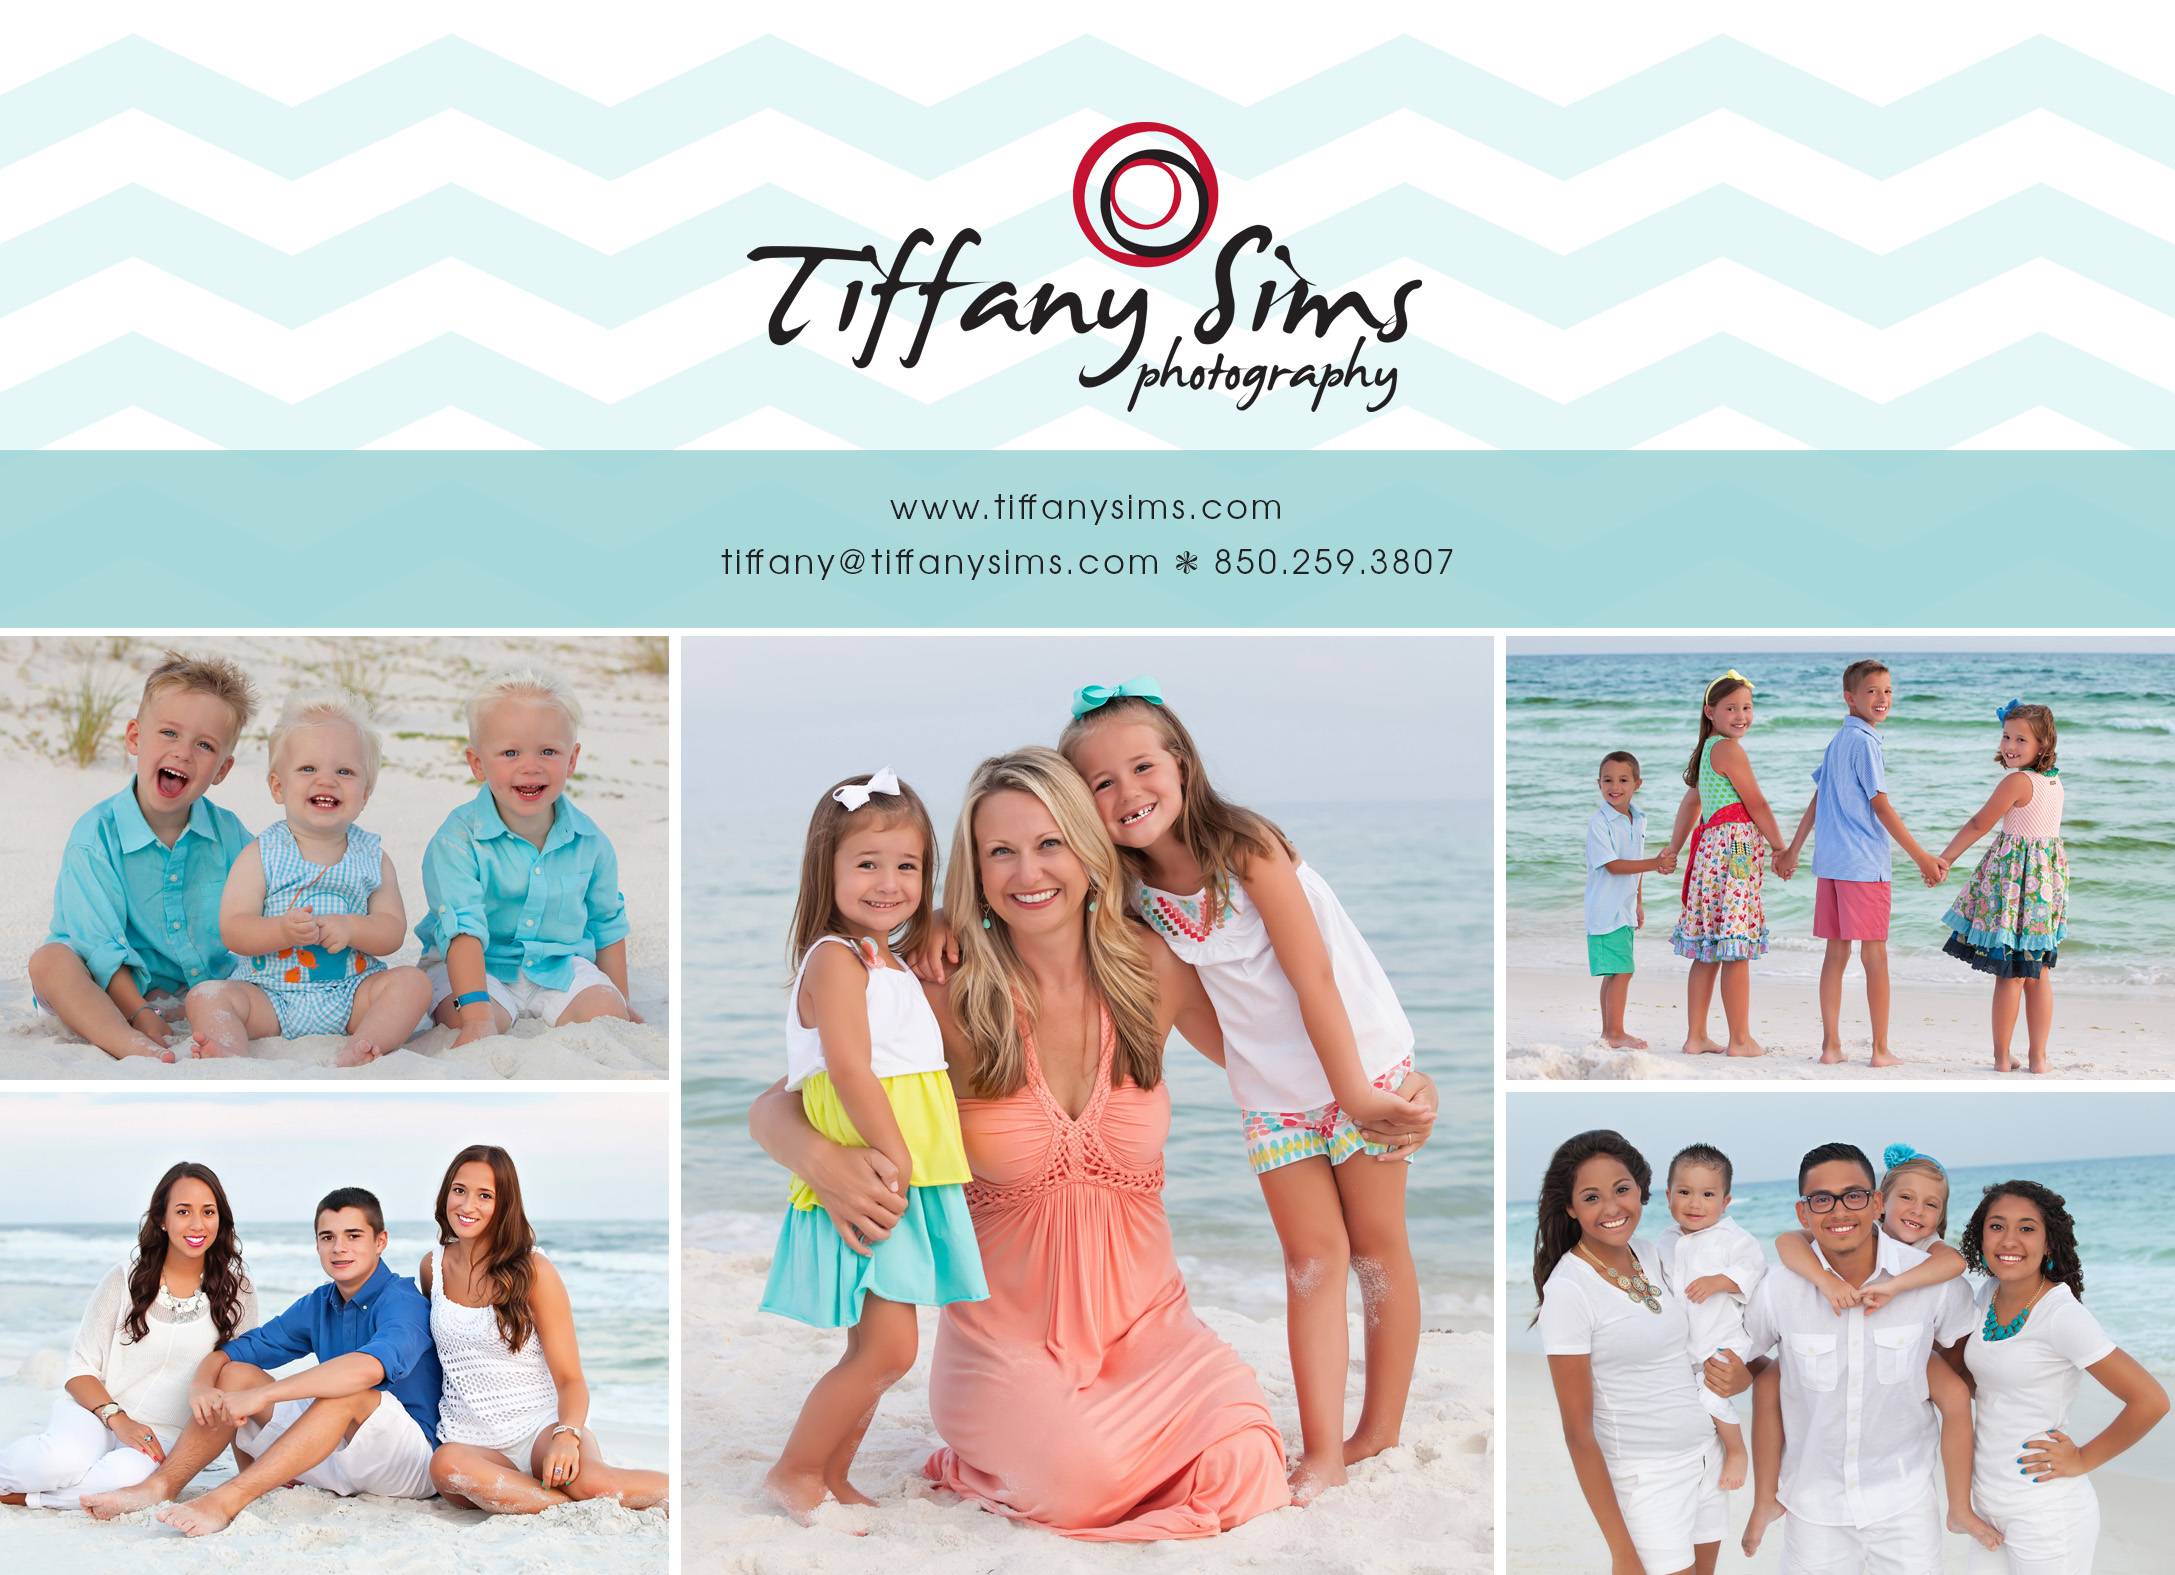 Destin Photography by Tiffany Sims Photography #destin #destinphotography #destinbeachphotography #30aphotography #30abeachphotography #destinphotographer #30aphotographer #fortwaltonbeachphotography #okaloosaislandphotography | BeachCardFront2015